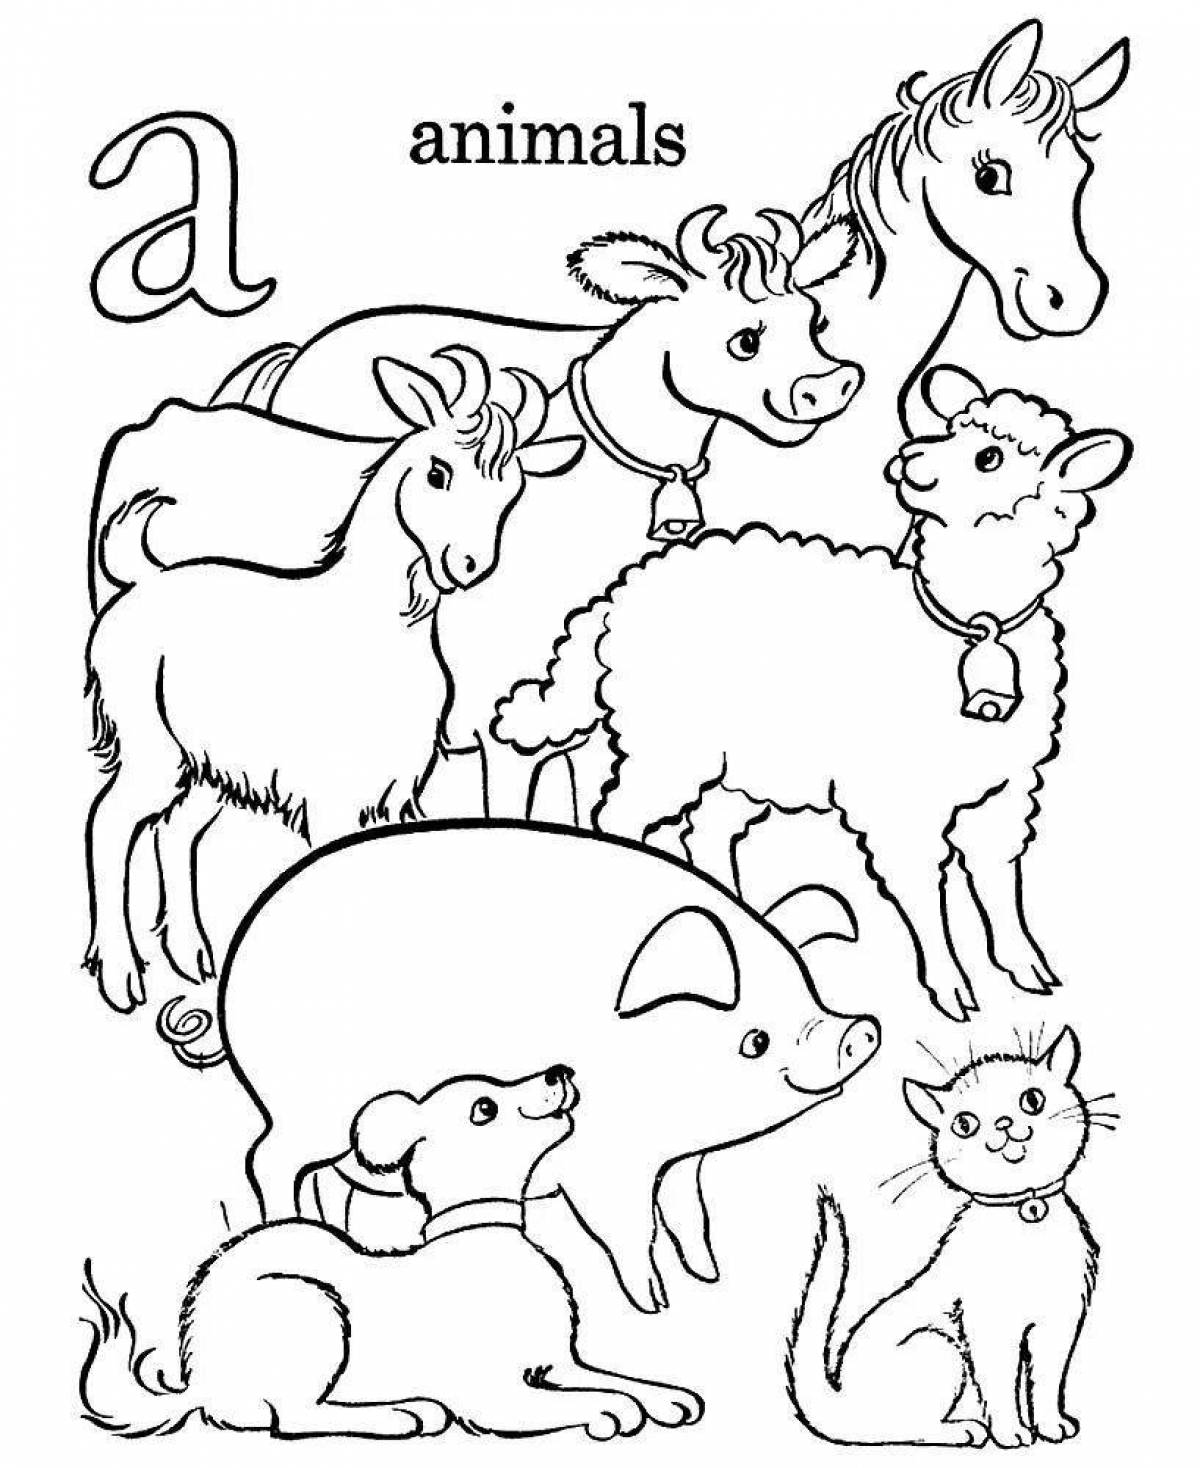 Cute animal coloring pages for 5-7 year olds